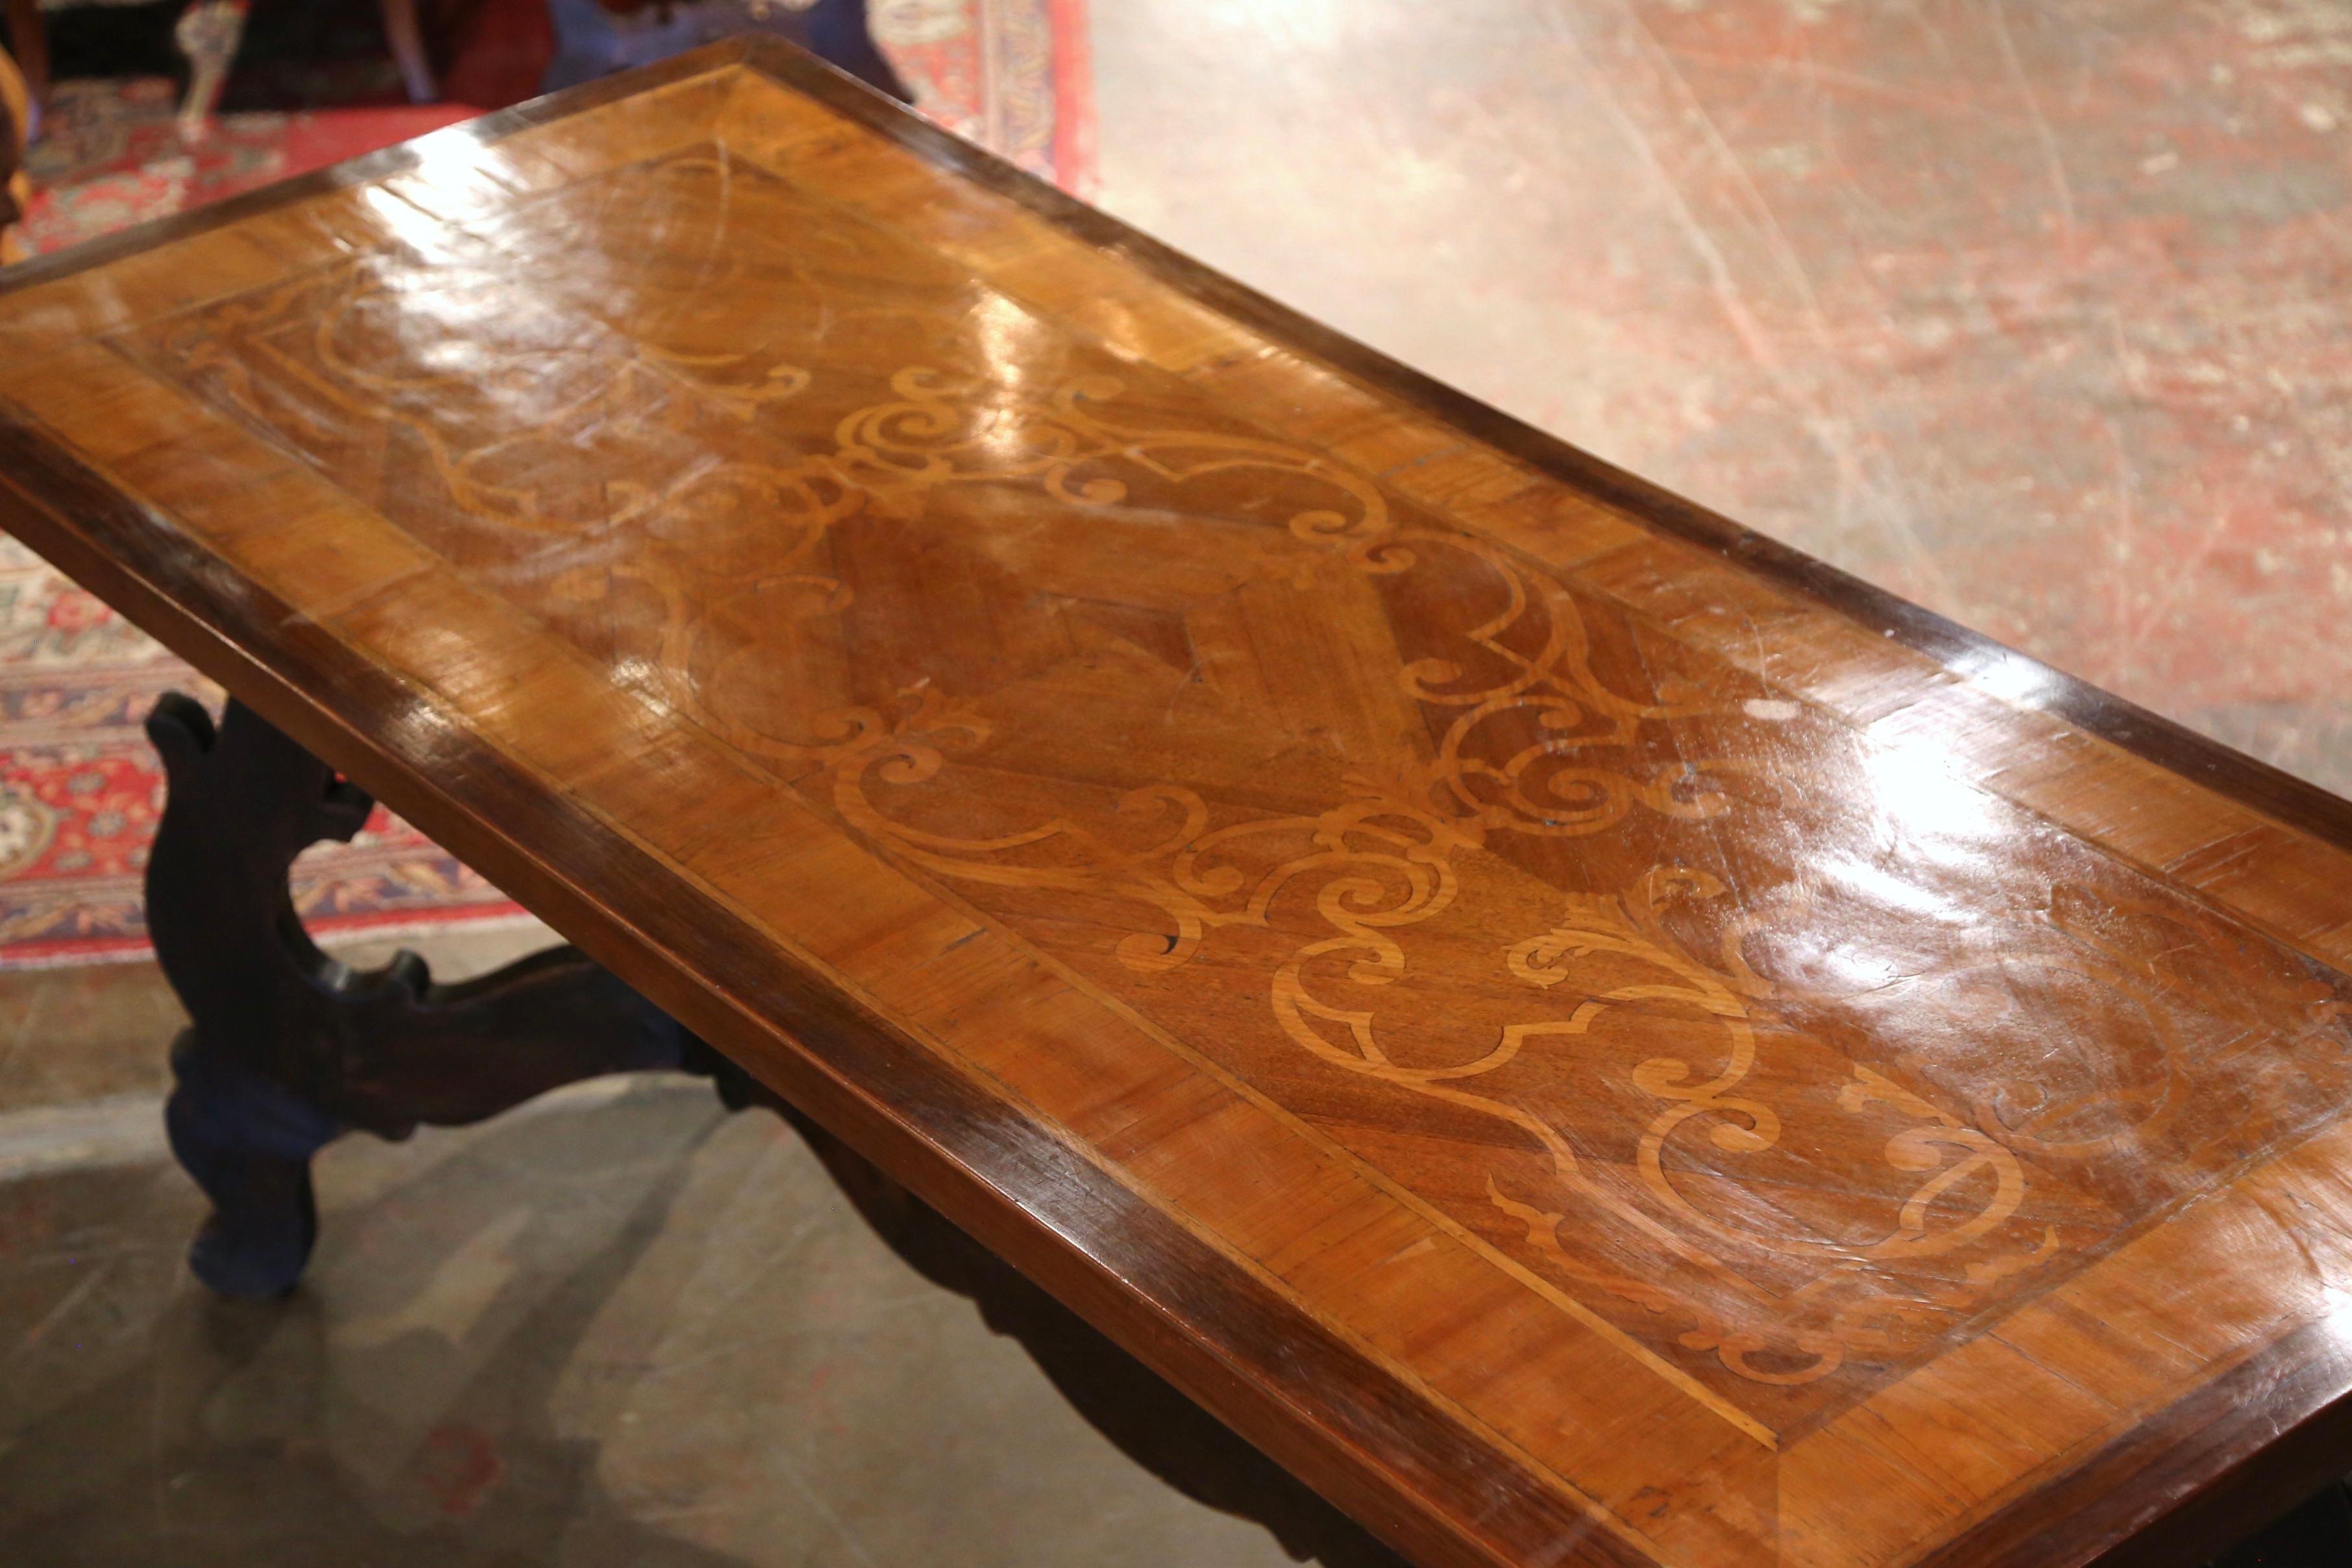 Patinated Mid-19th Century Italian Baroque Carved Walnut Marquetry Trestle Dining Table